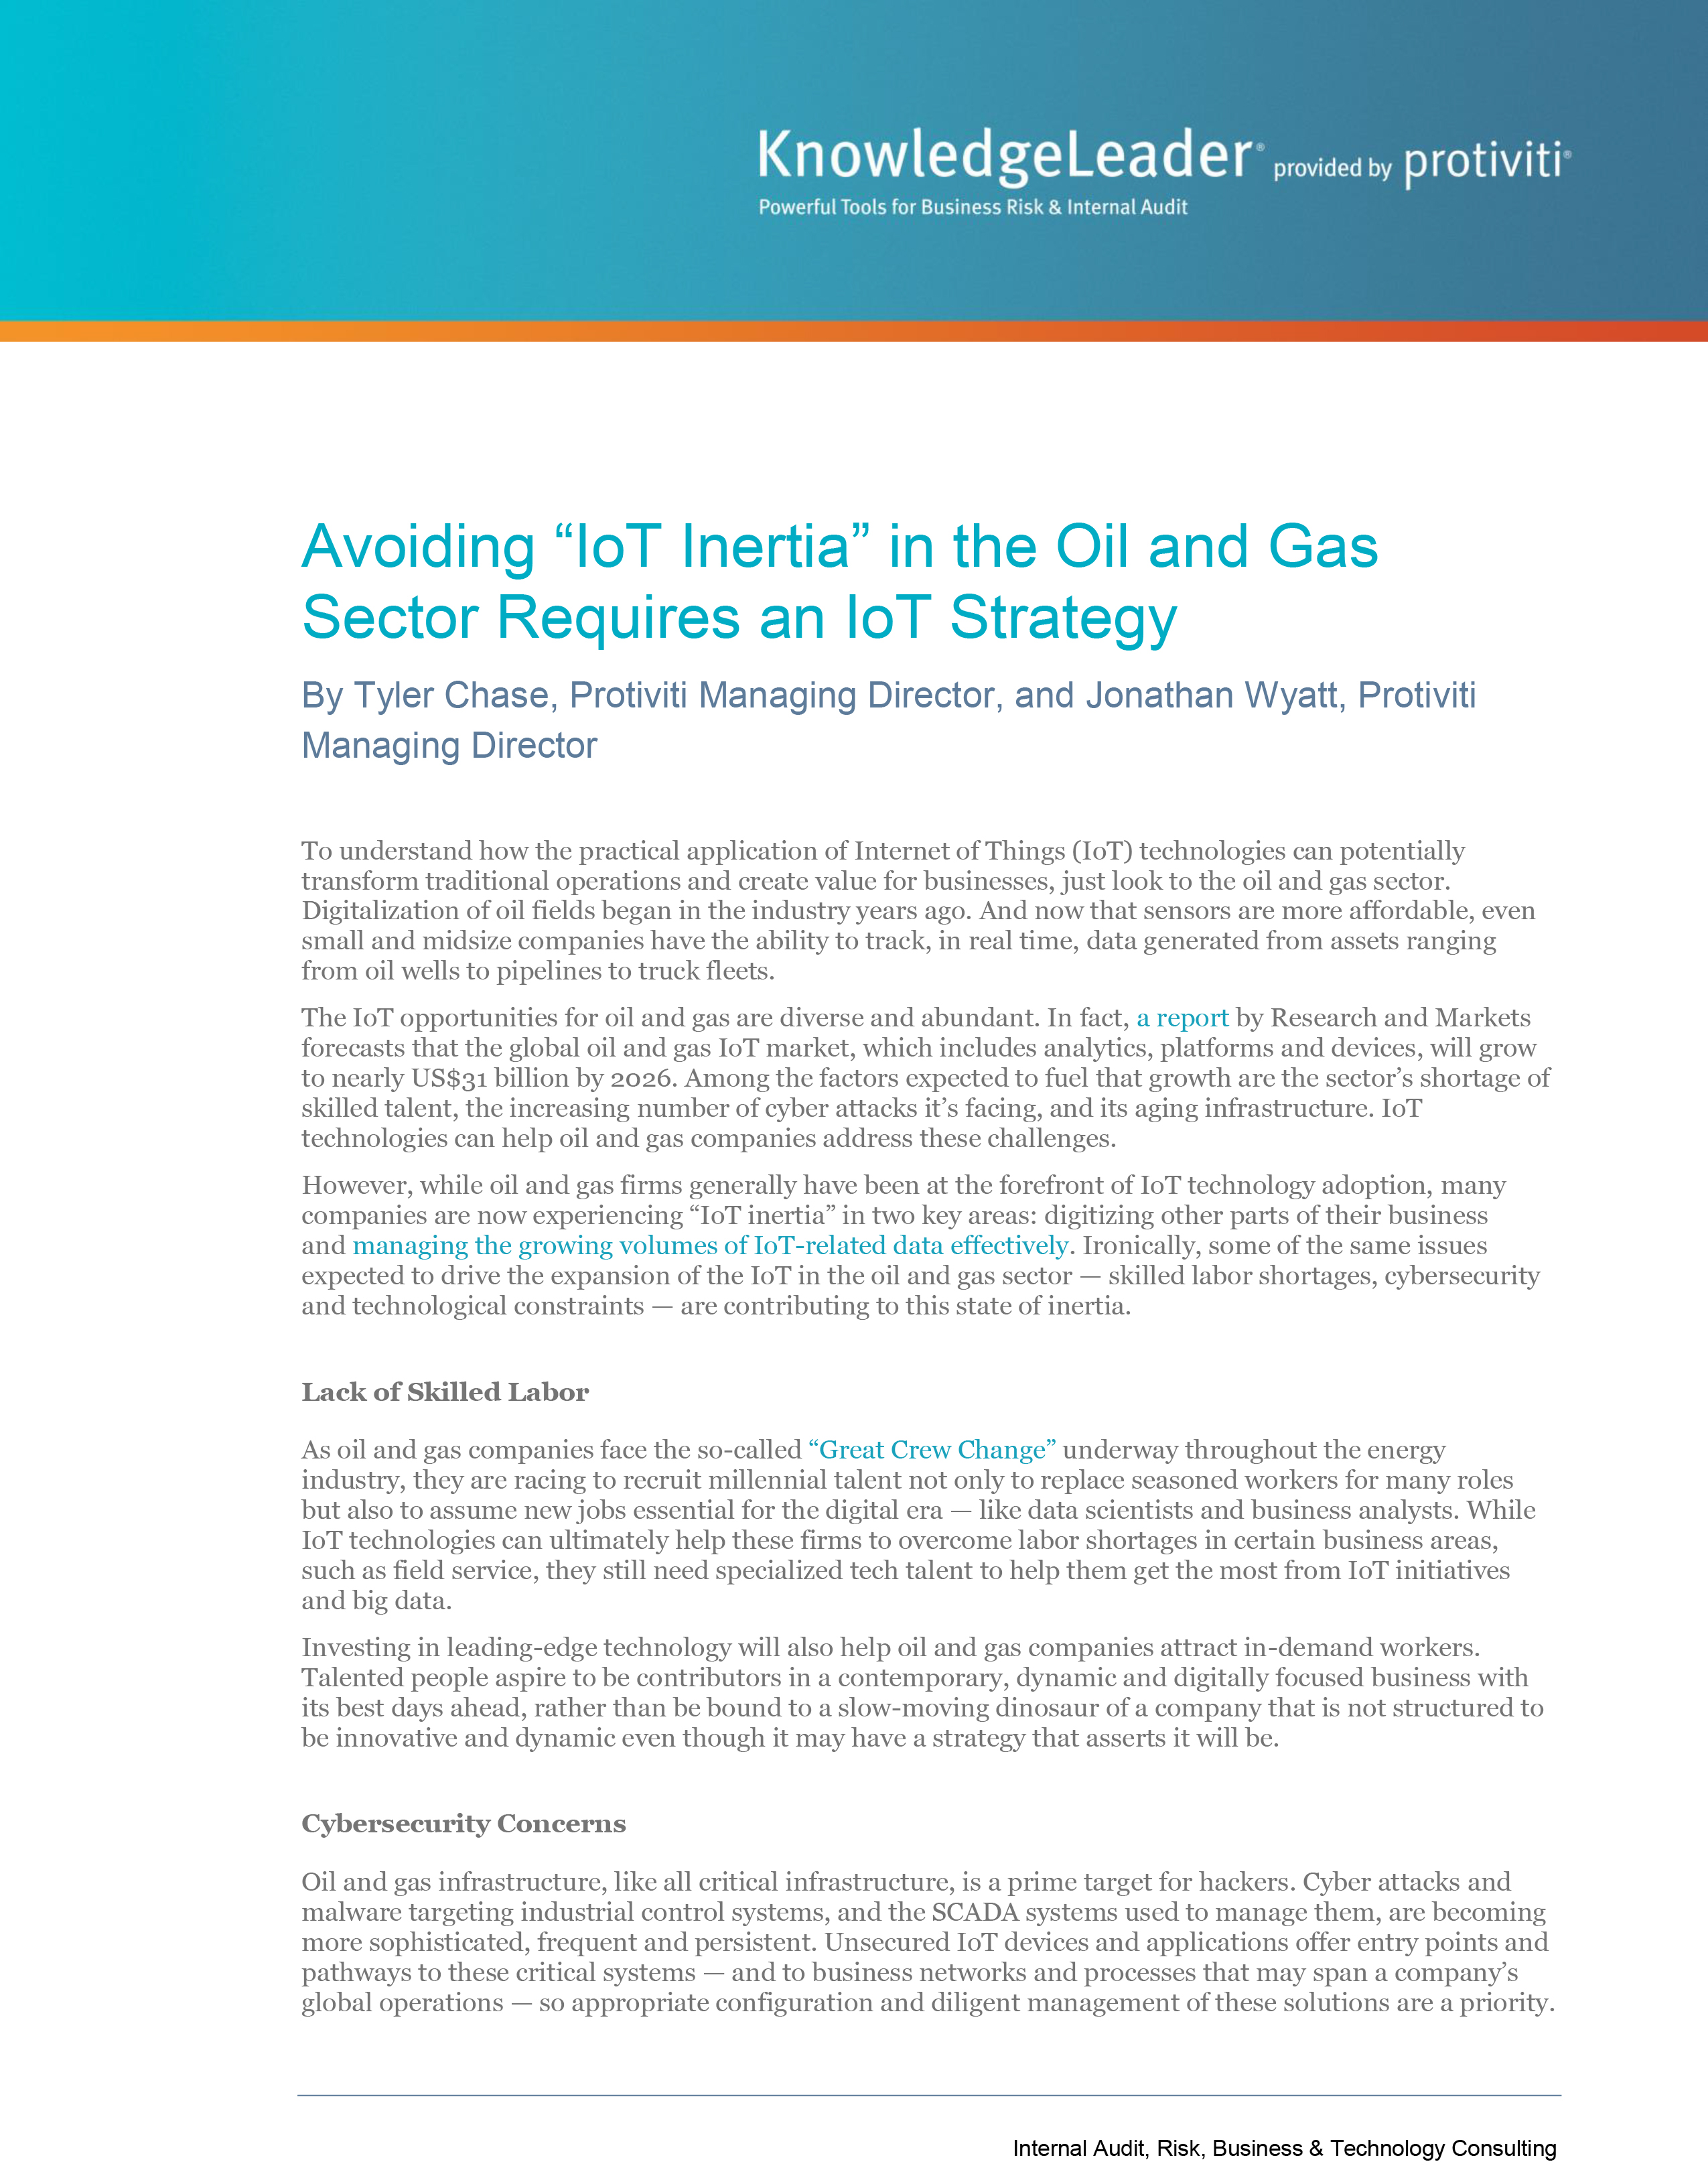 Screenshot of the first page of Avoiding “IoT Inertia” in the Oil and Gas Sector Requires an IoT Strategy